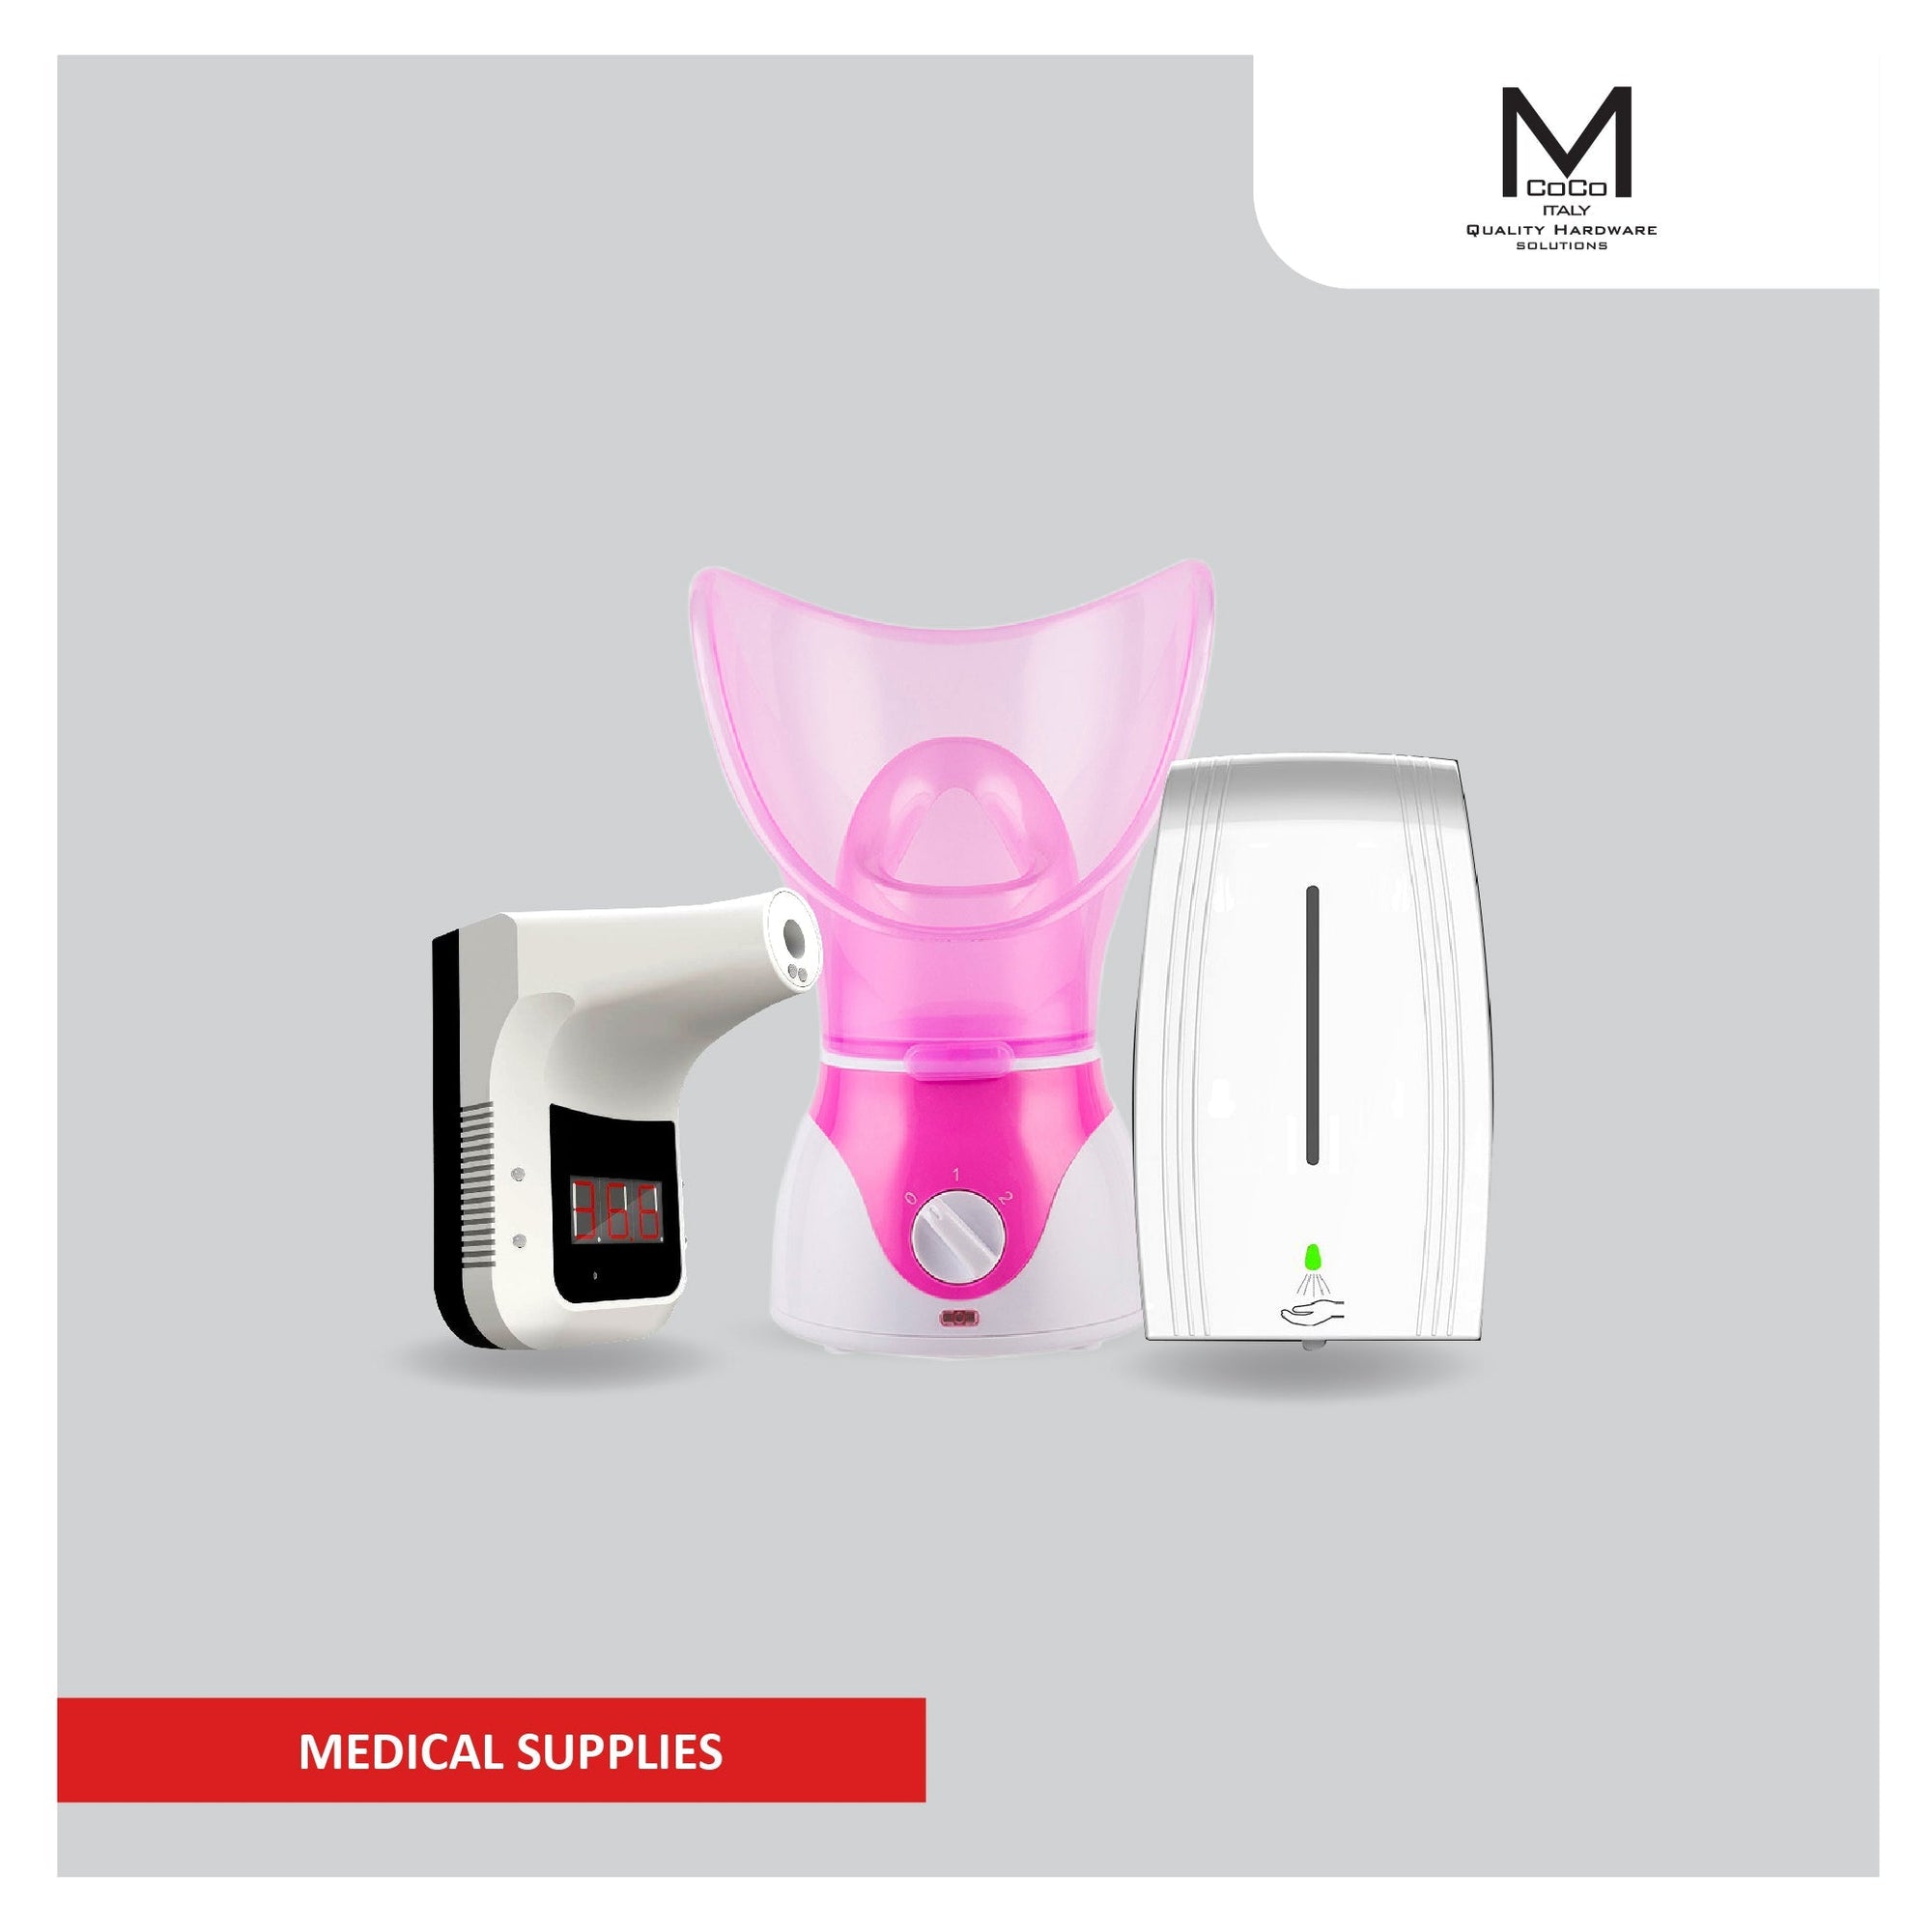 Mcoco Medical Supplies - top-quality medical equipment and accessories from M. M. Noorbhoy & Co.